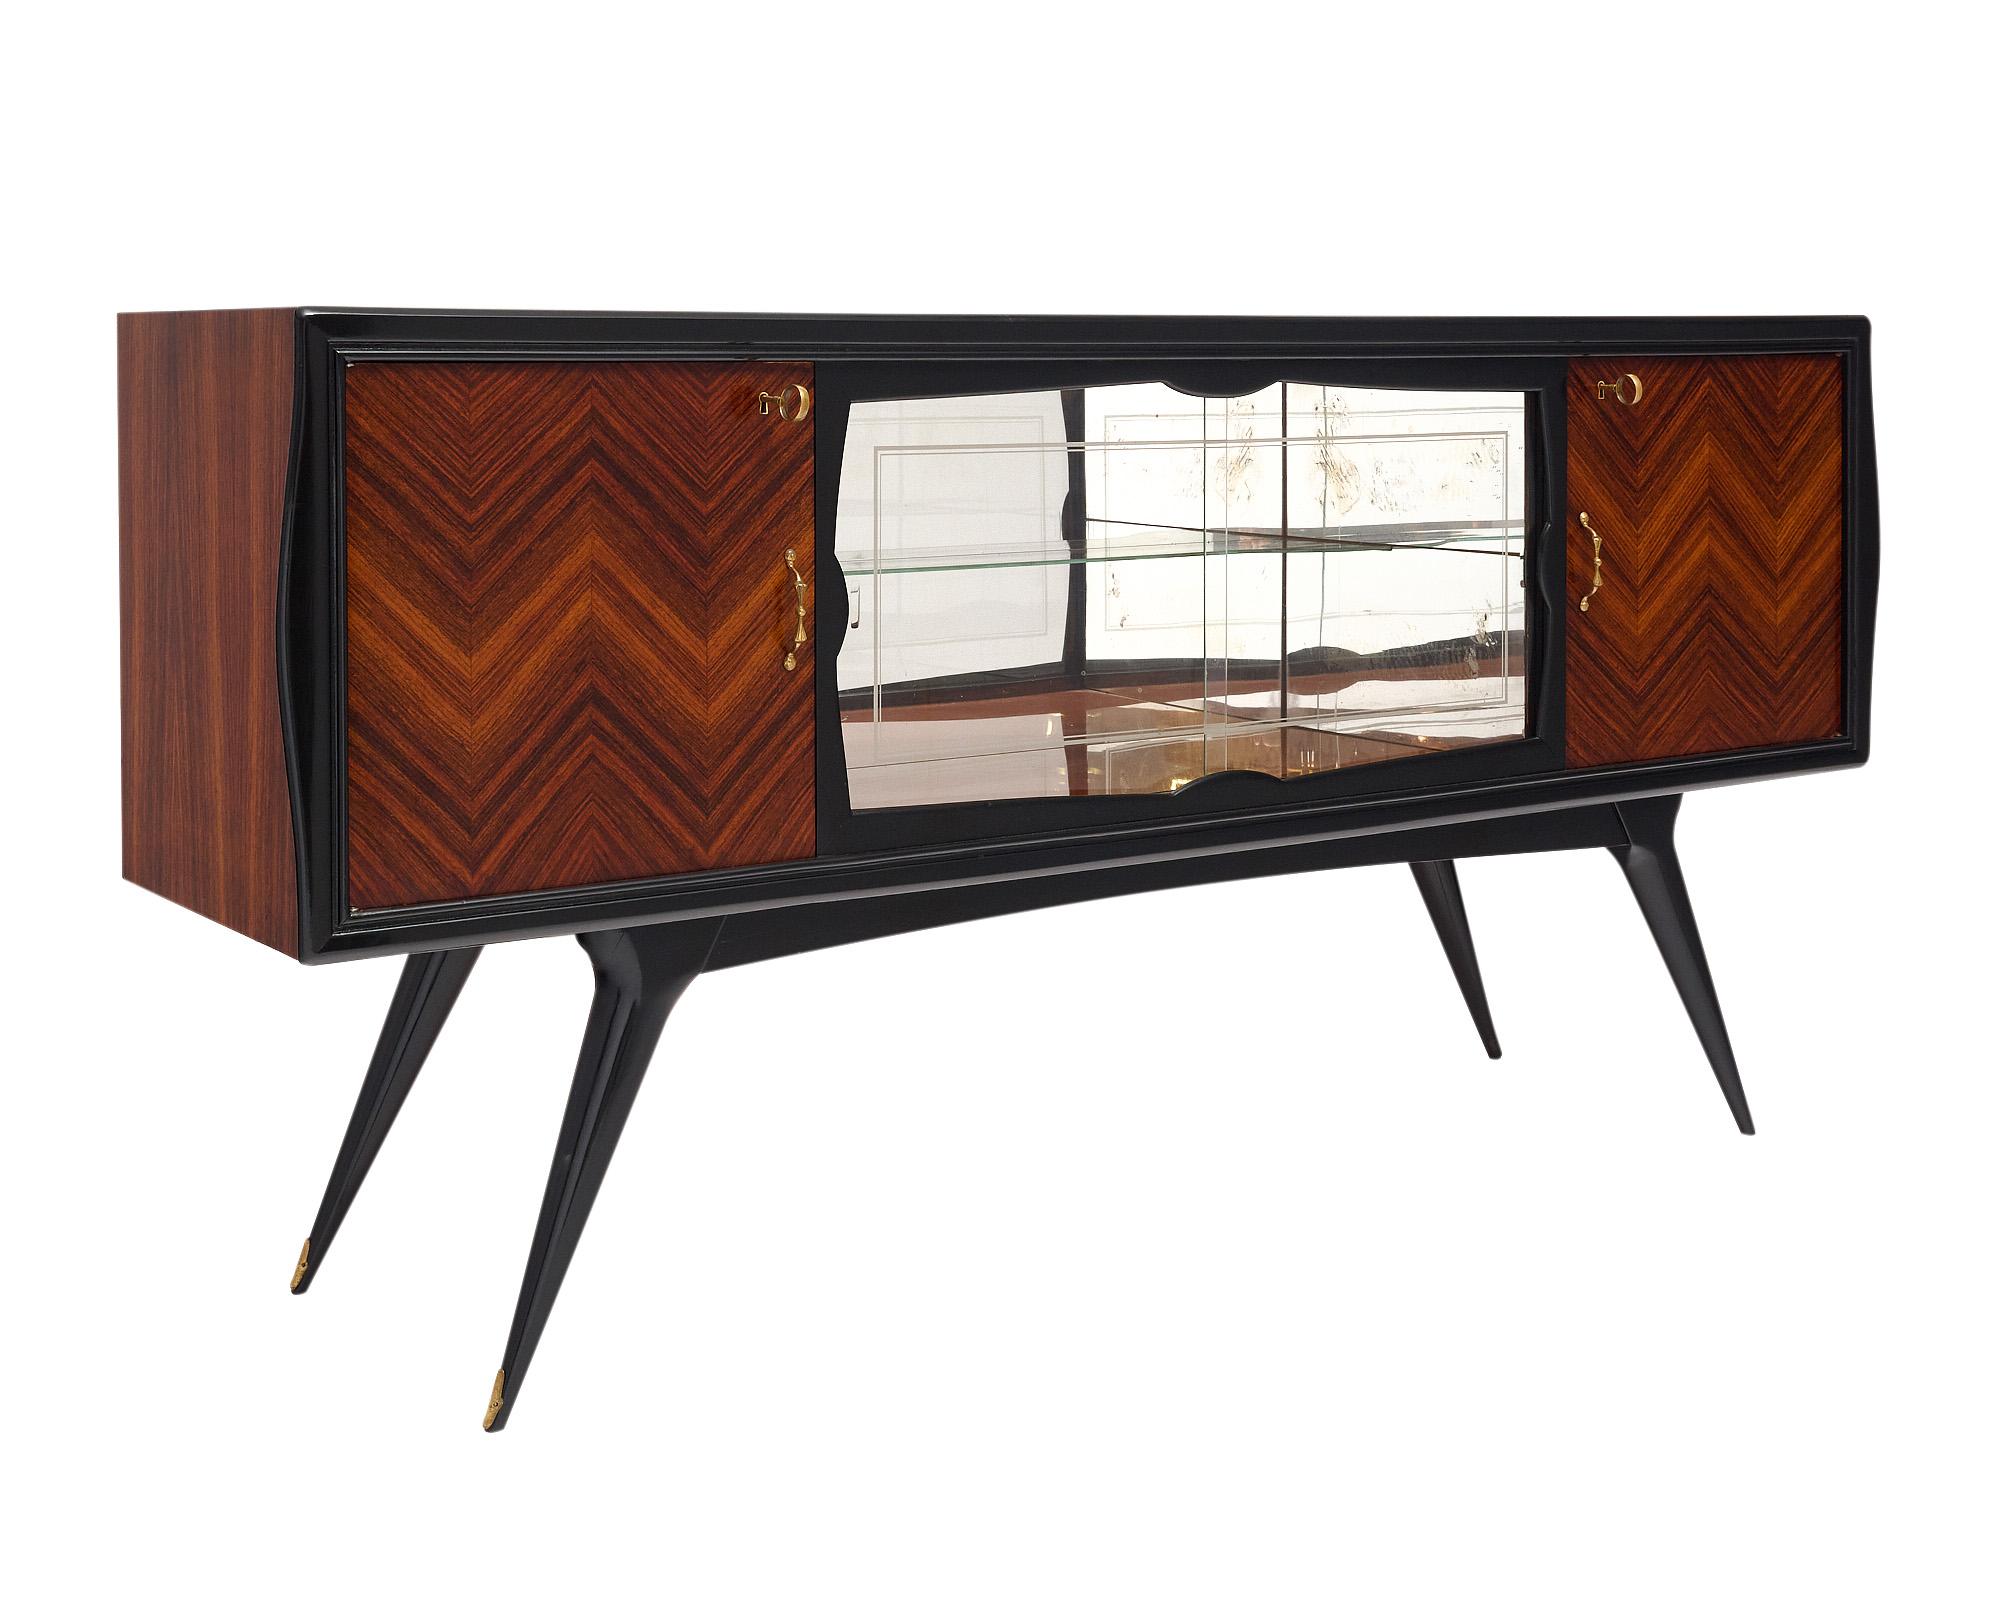 Modernist buffet from Italy. This piece has the iconic flared legs a chevron pattern to the rosewood façade. The two doors open outward to interior shelving, while the center section of the buffet forms the bar, adorned by two glass sliding panels.